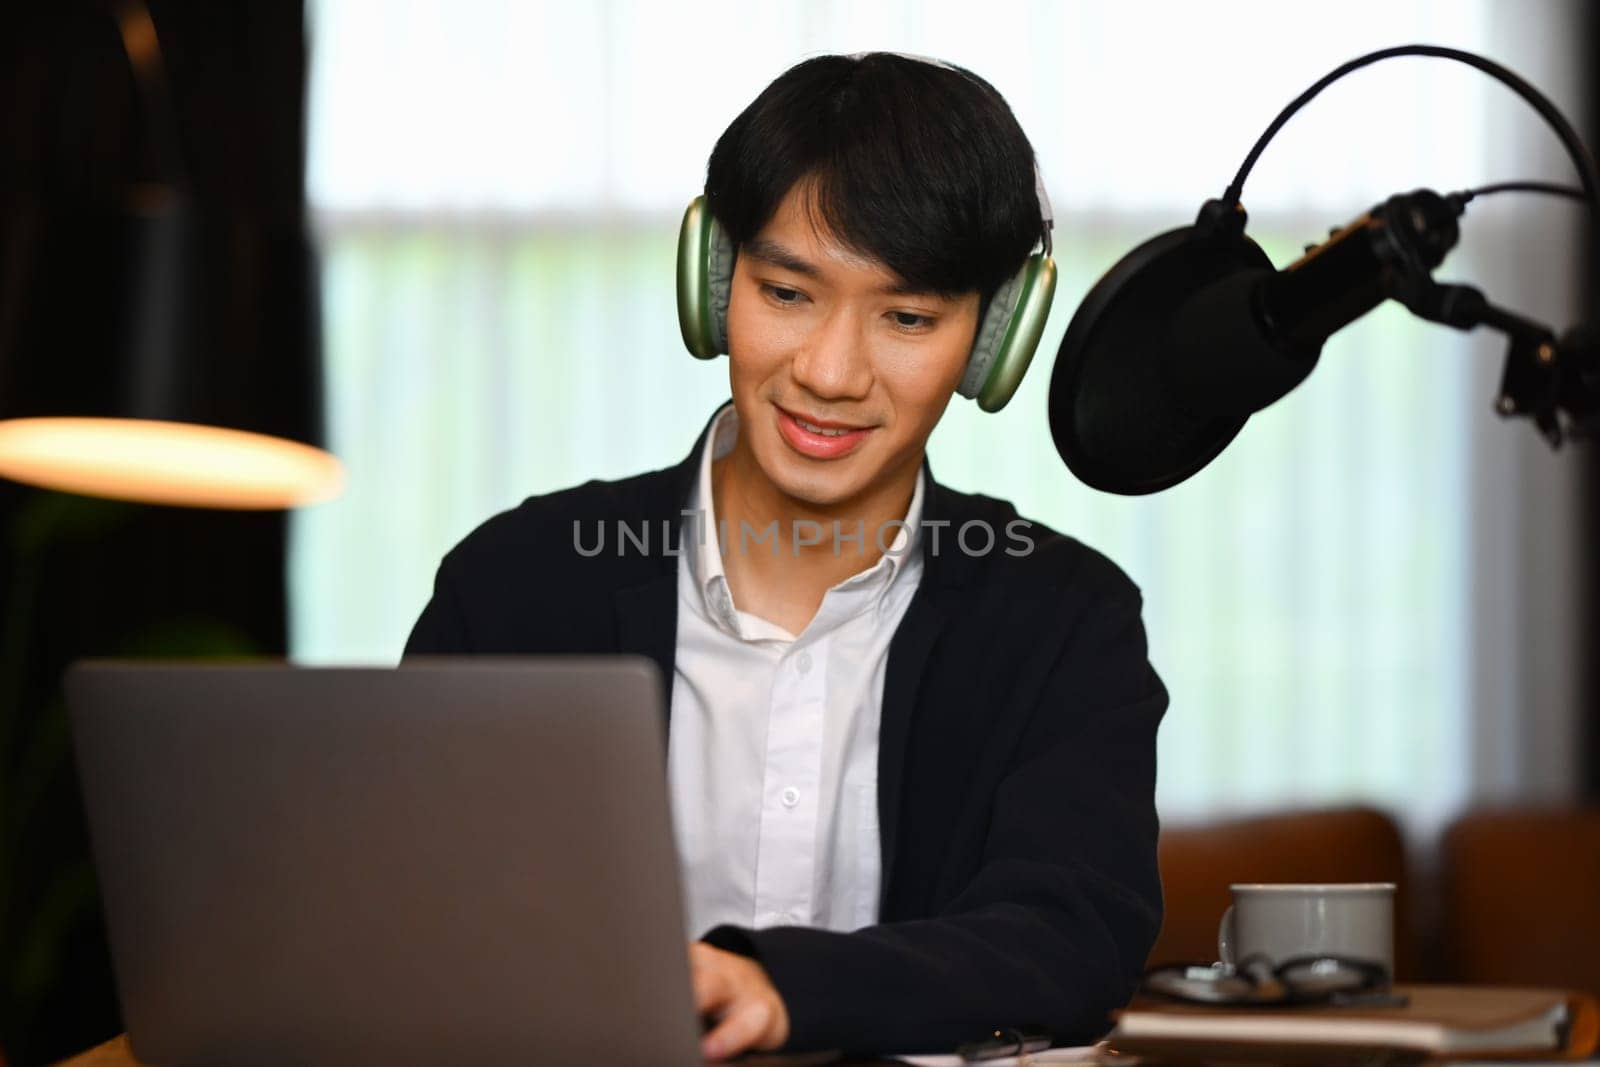 Man podcaster wearing headphone recording podcast from home studio. Radio, podcasts, blogging and technology concept by prathanchorruangsak